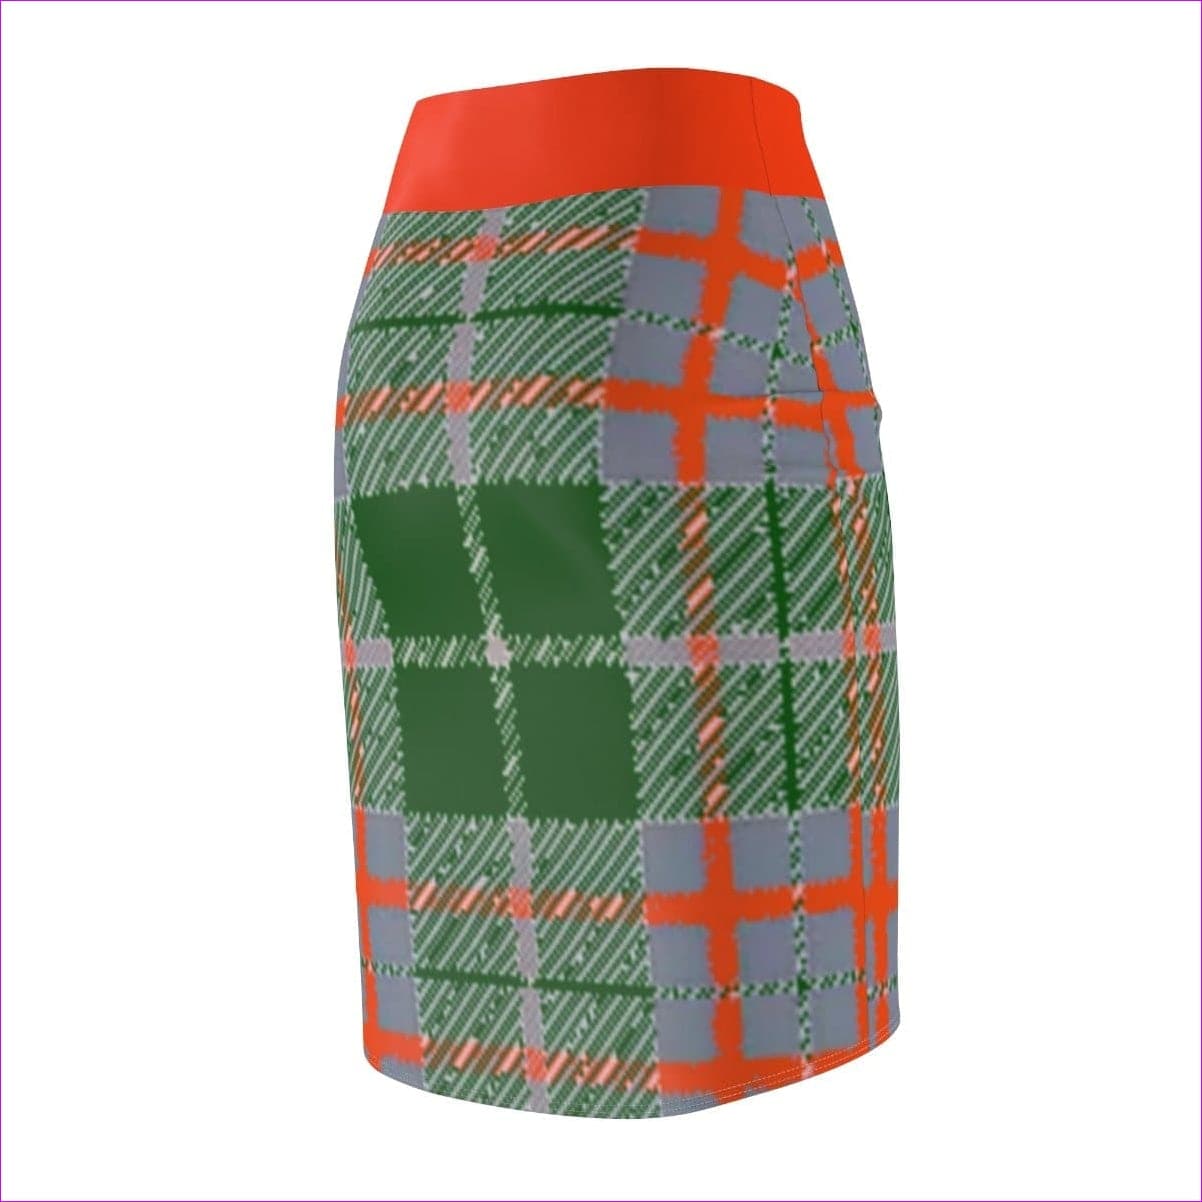 Tribute to Plaid Women's Pencil Skirt- Ships from The US - women's skirt at TFC&H Co.